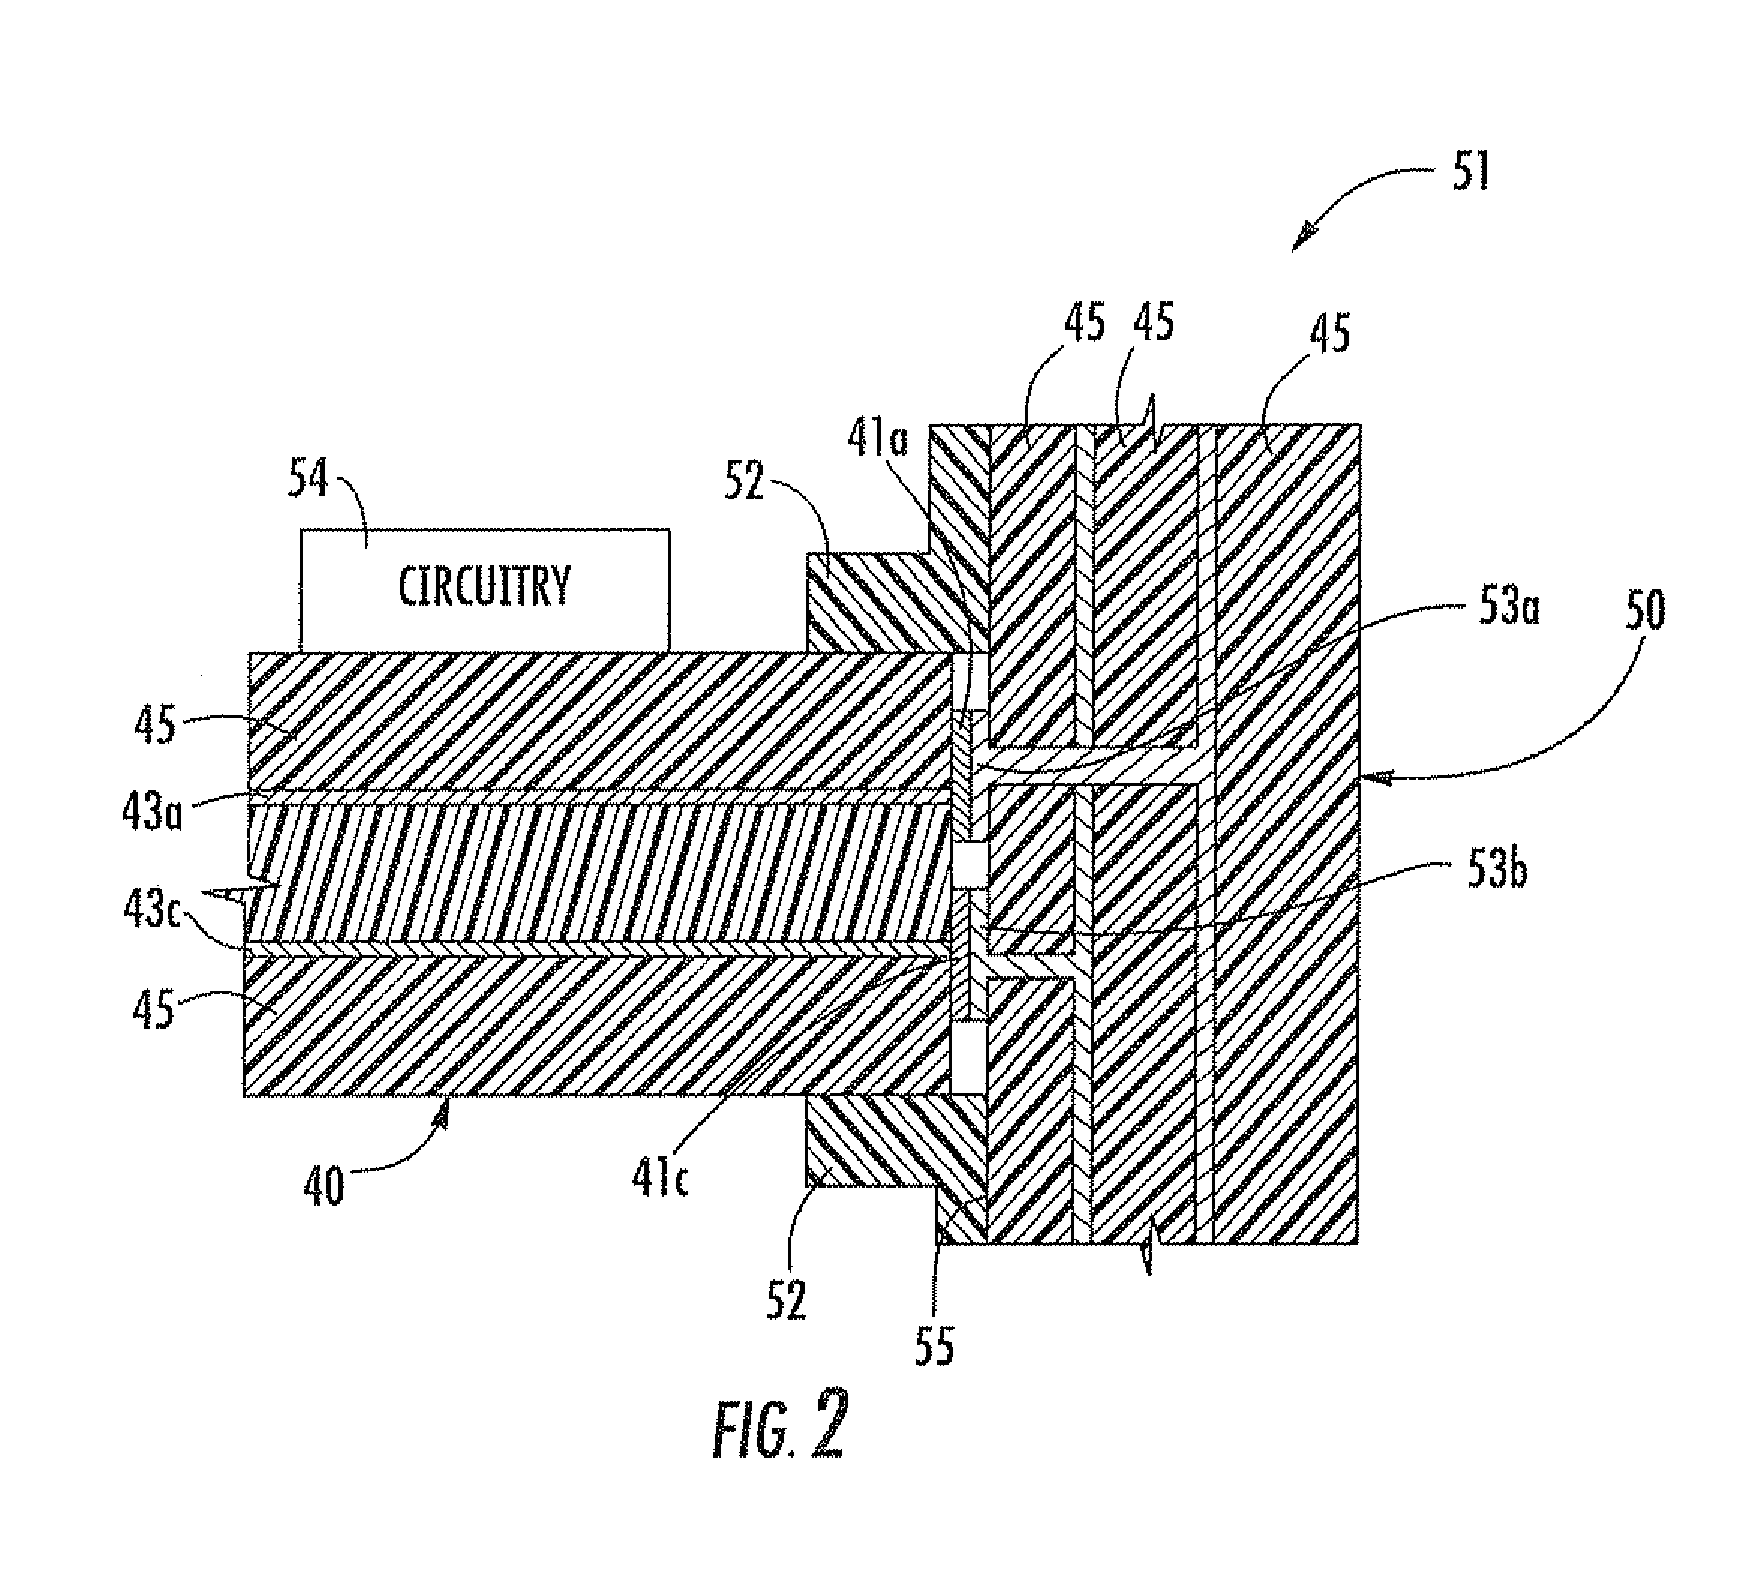 Printed wiring board assembly and related methods